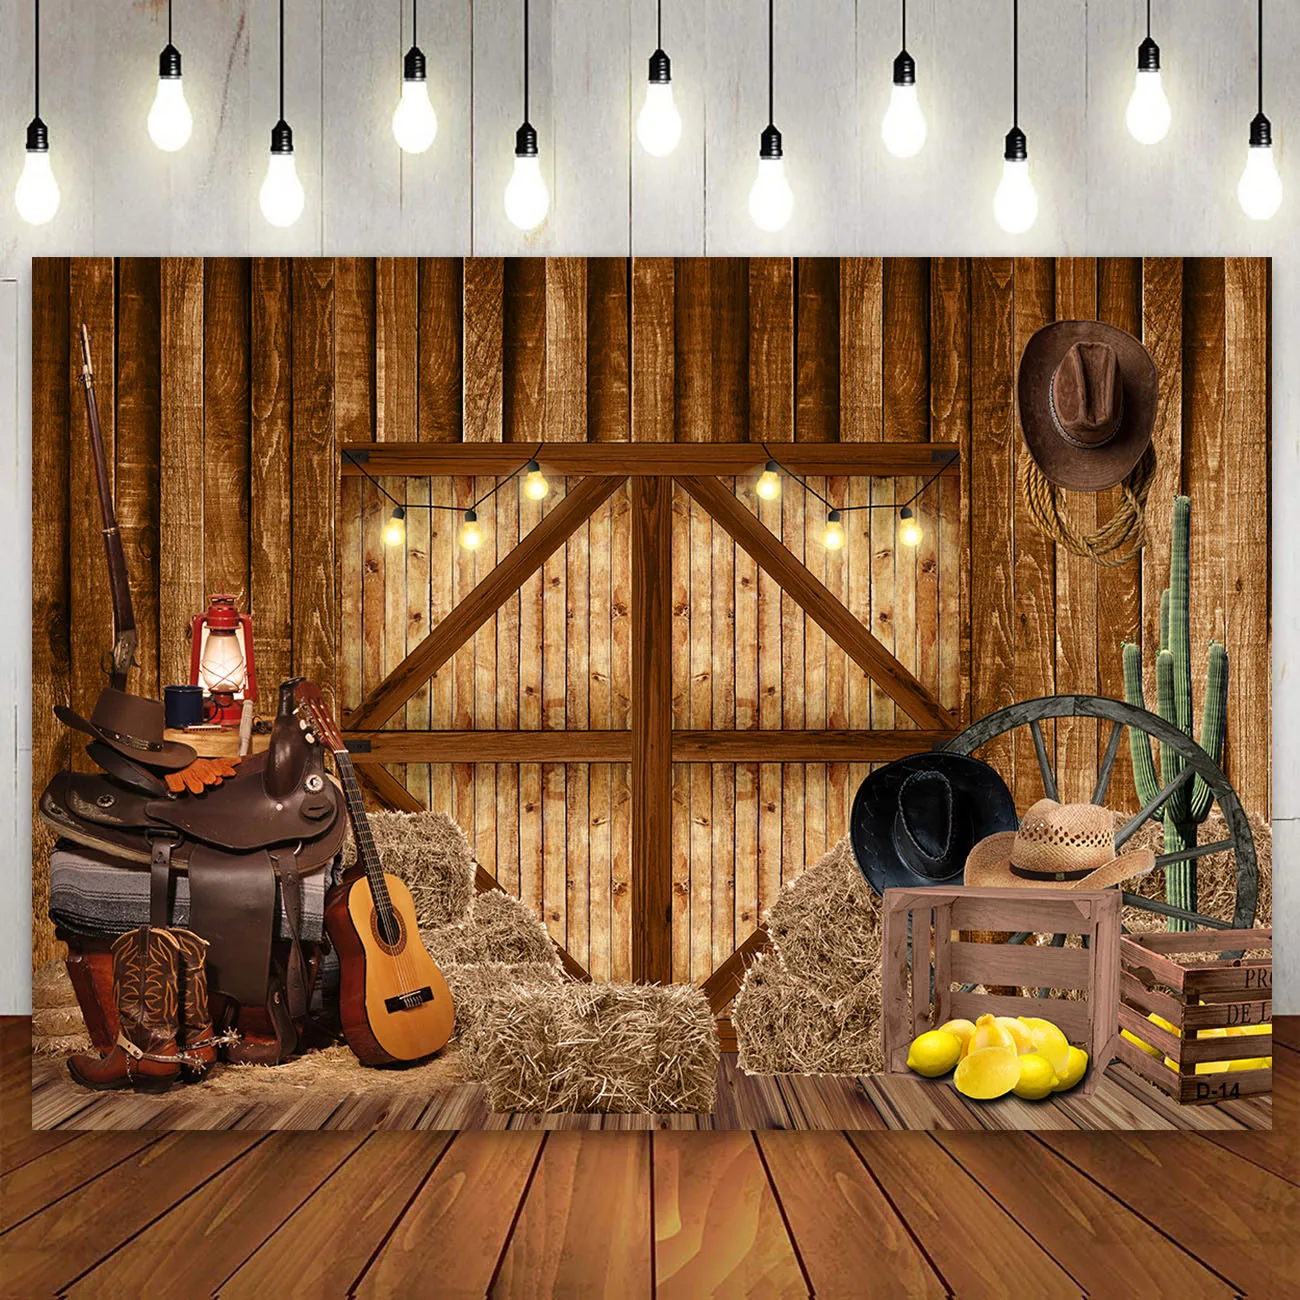 

Western Cowboy Birthday Party Decor Backdrop Wild West Farm Rustic Wooden House Warehouse Barn Banner Photography Background